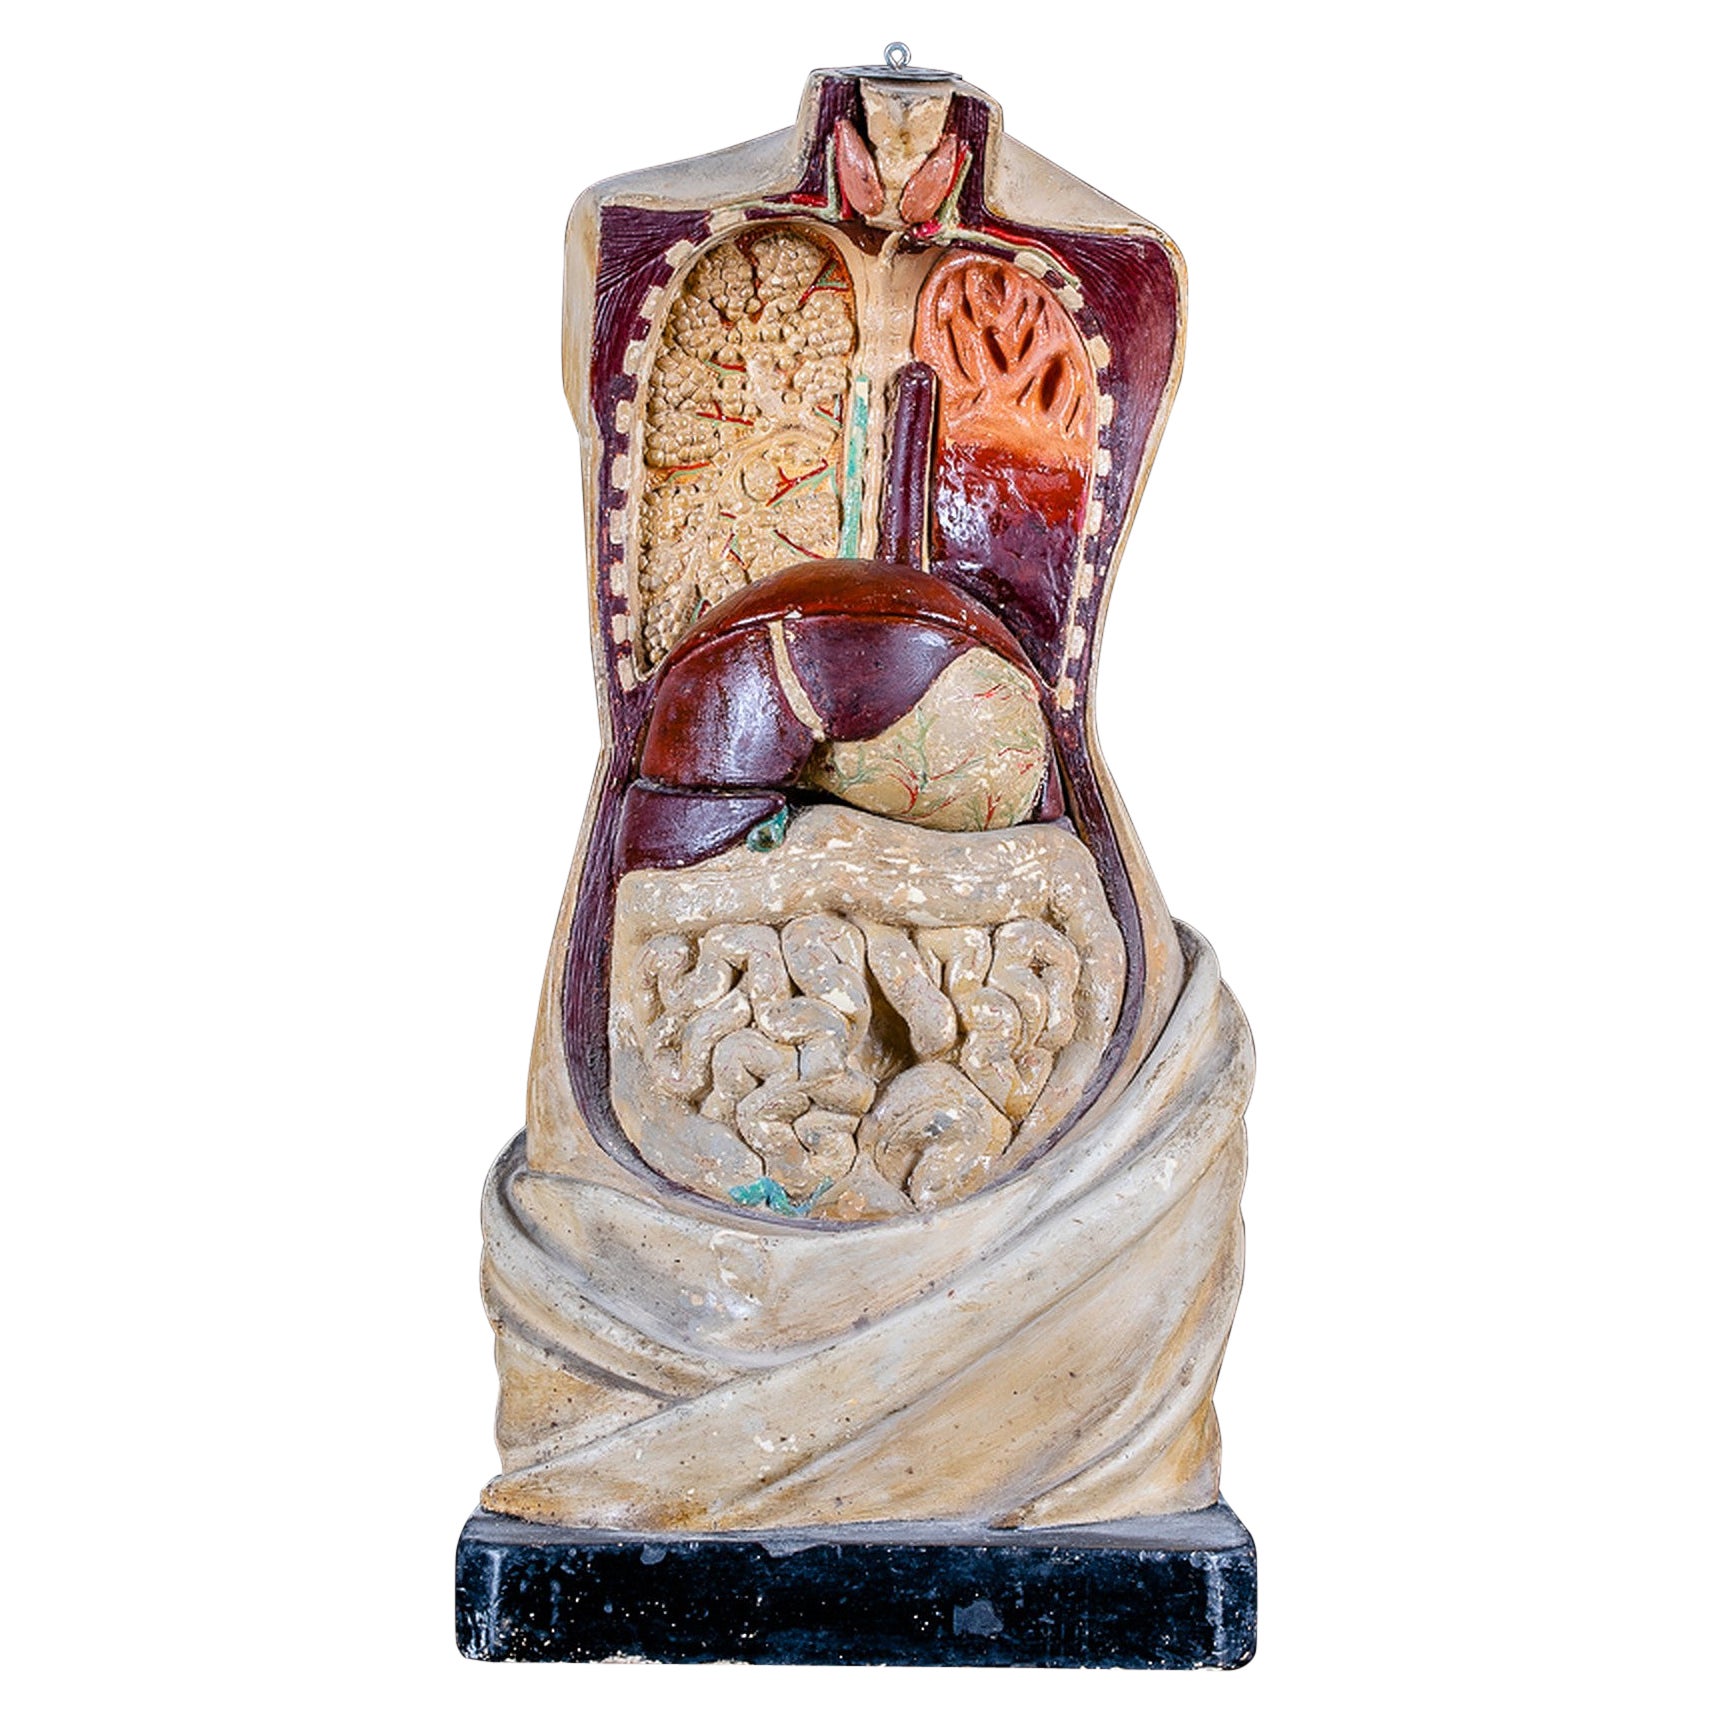 19th C Anatomical Didactic Model of a Torso with Removable Organs